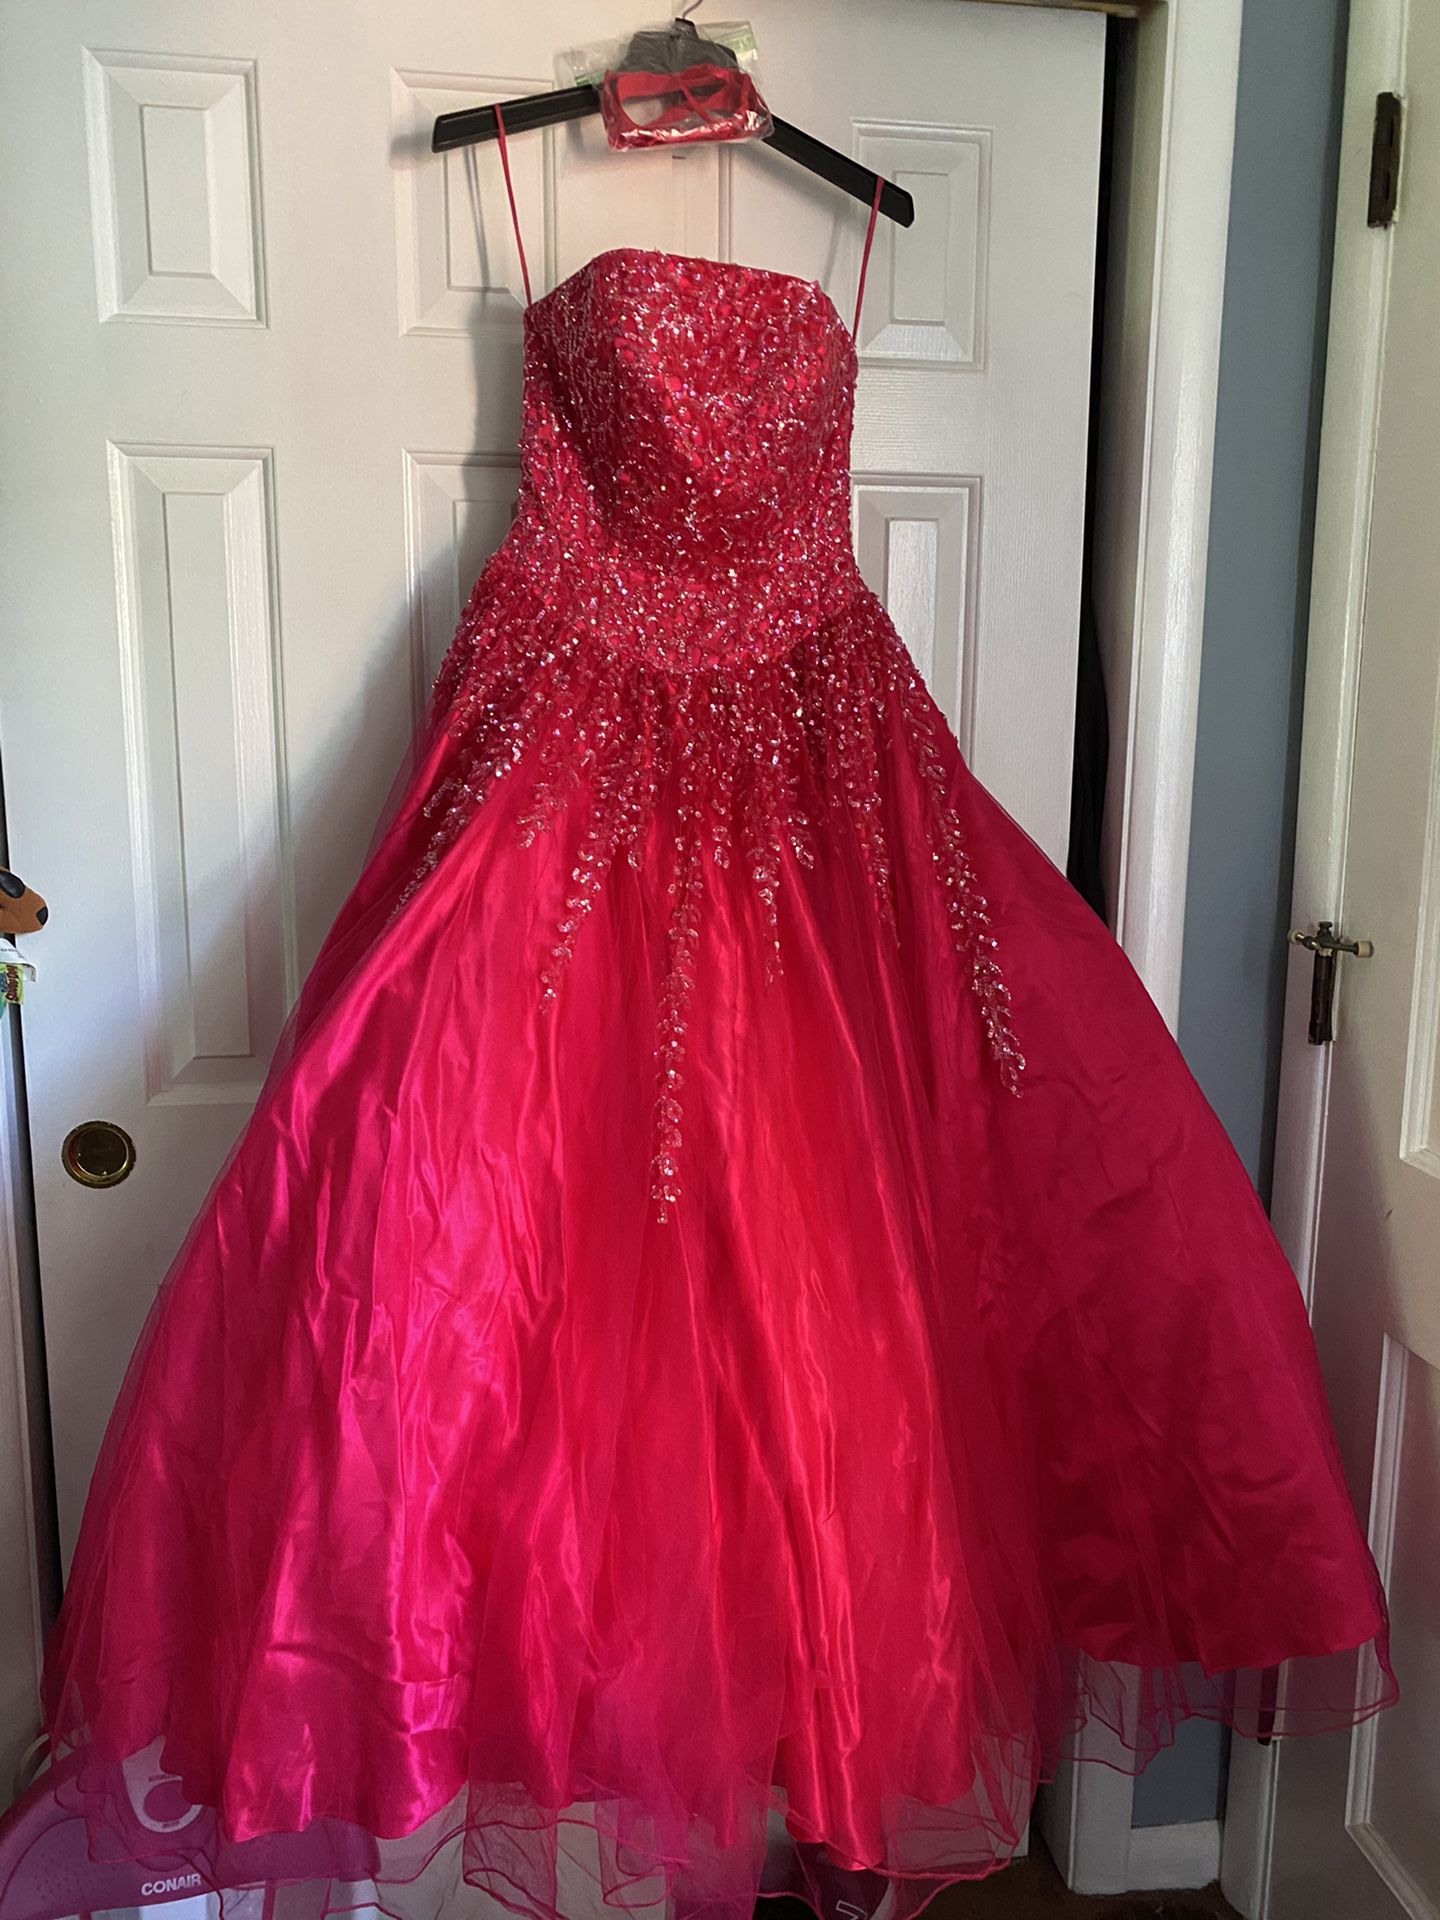 Quinceanera or prom dress size 4